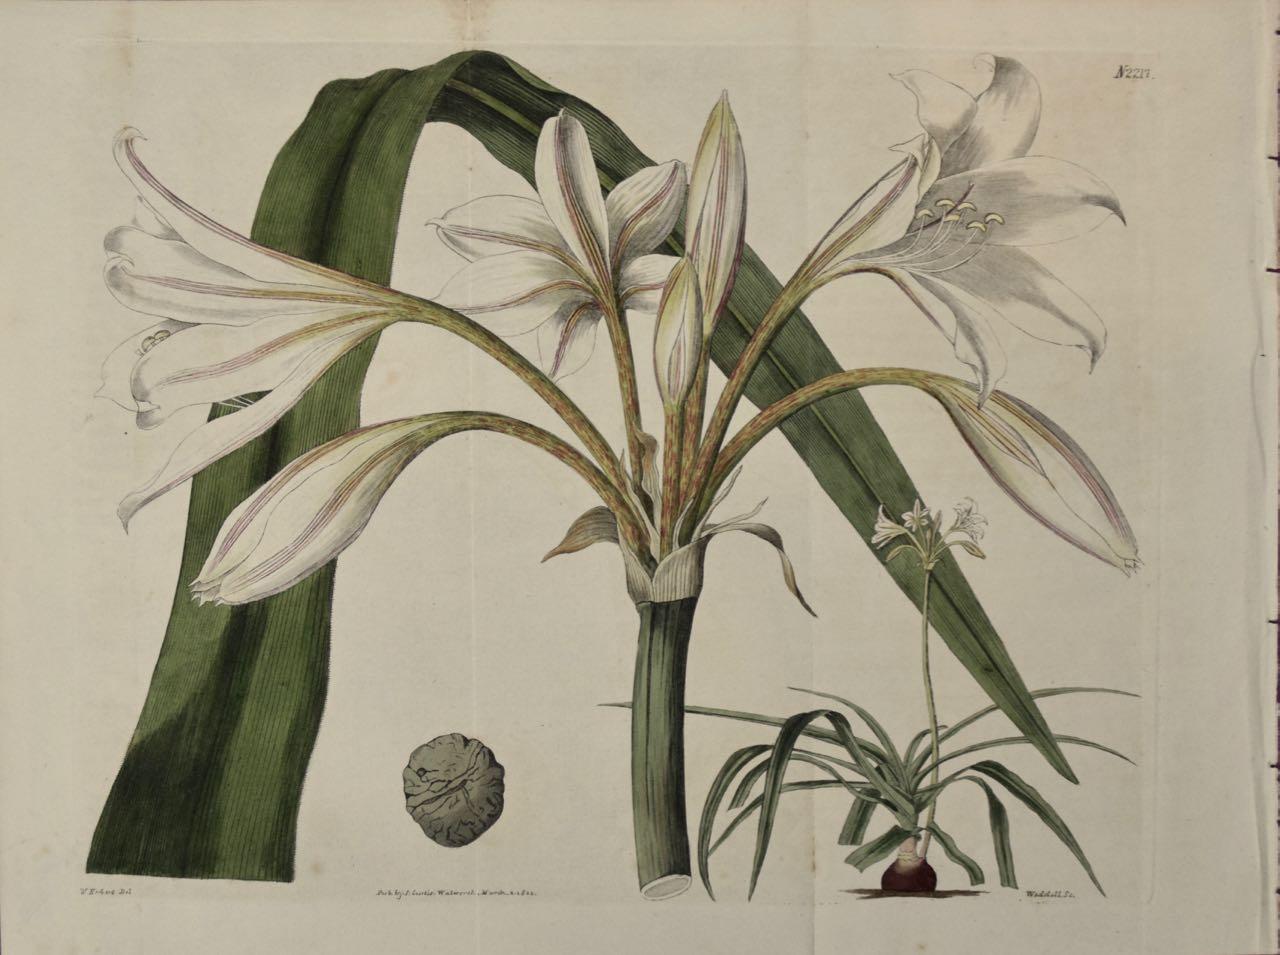 Flowering Crinum Plant: A 19th Century Hand-colored Engraving by Curtis